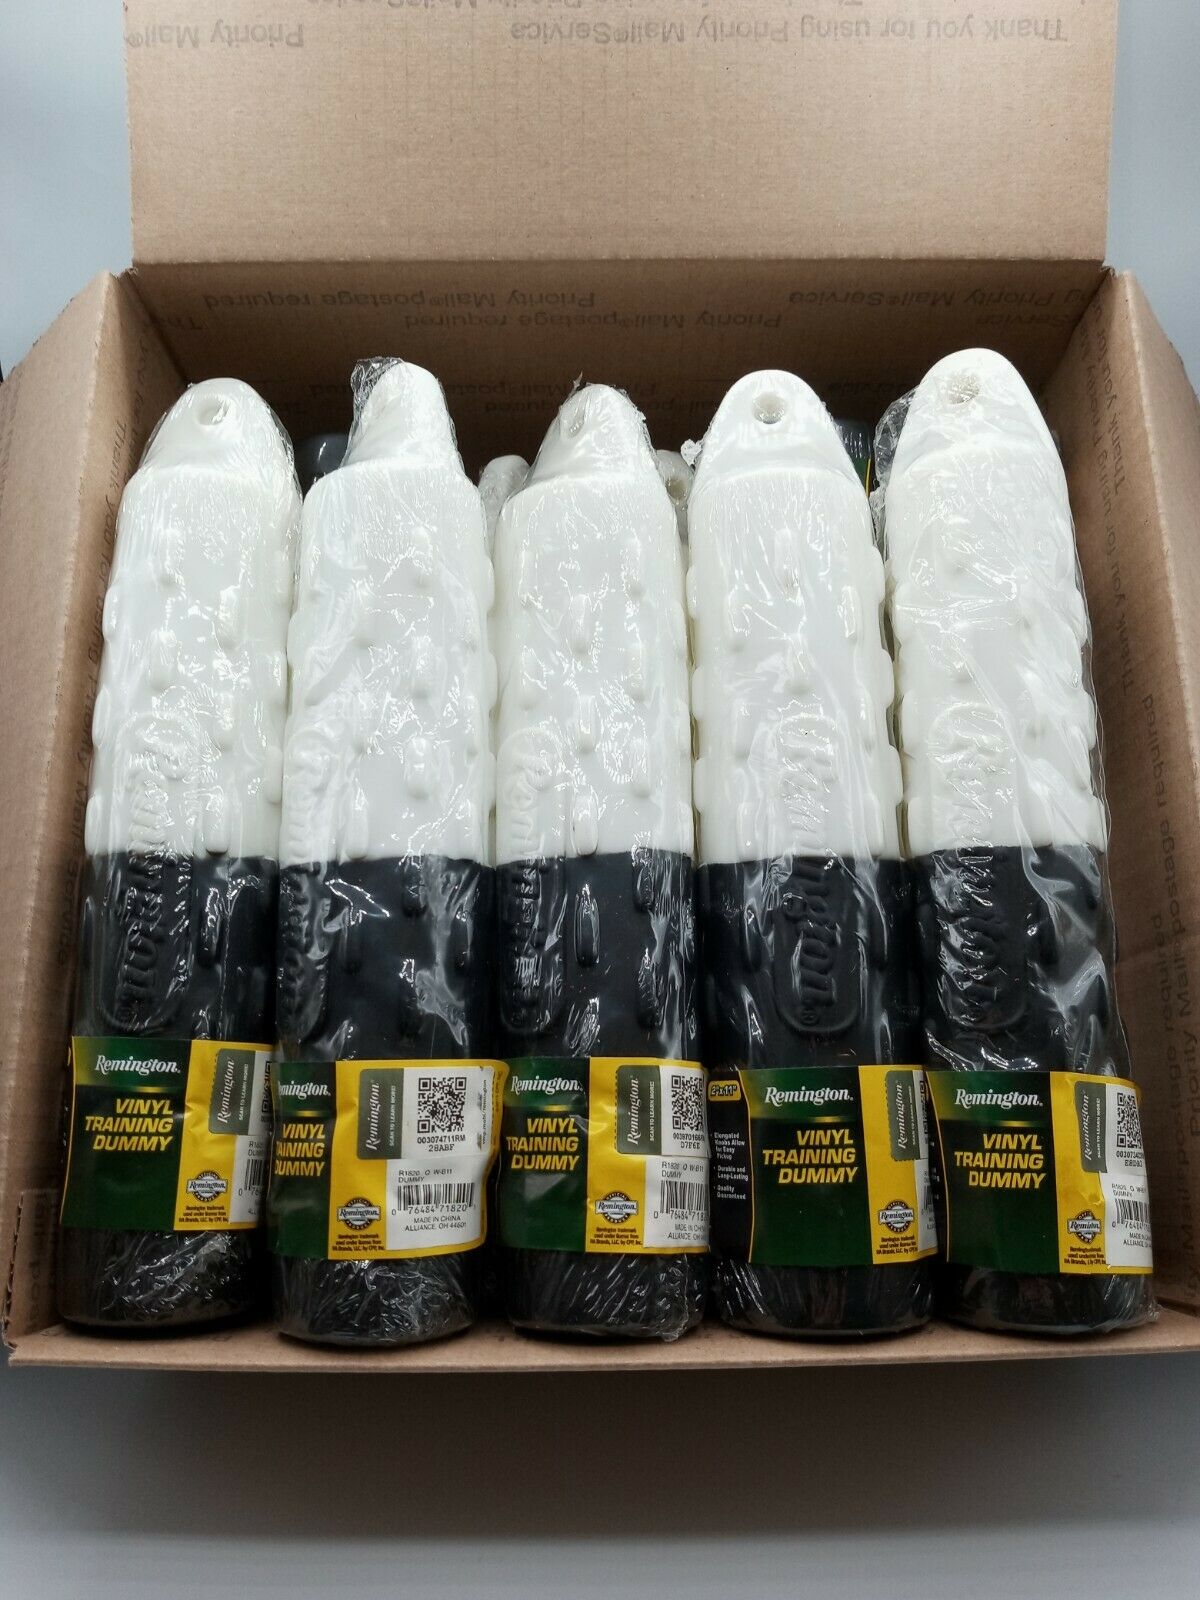 Lot Of 15 Remington Vinyl Training Dummy #1820: 2" X 11" New In Package